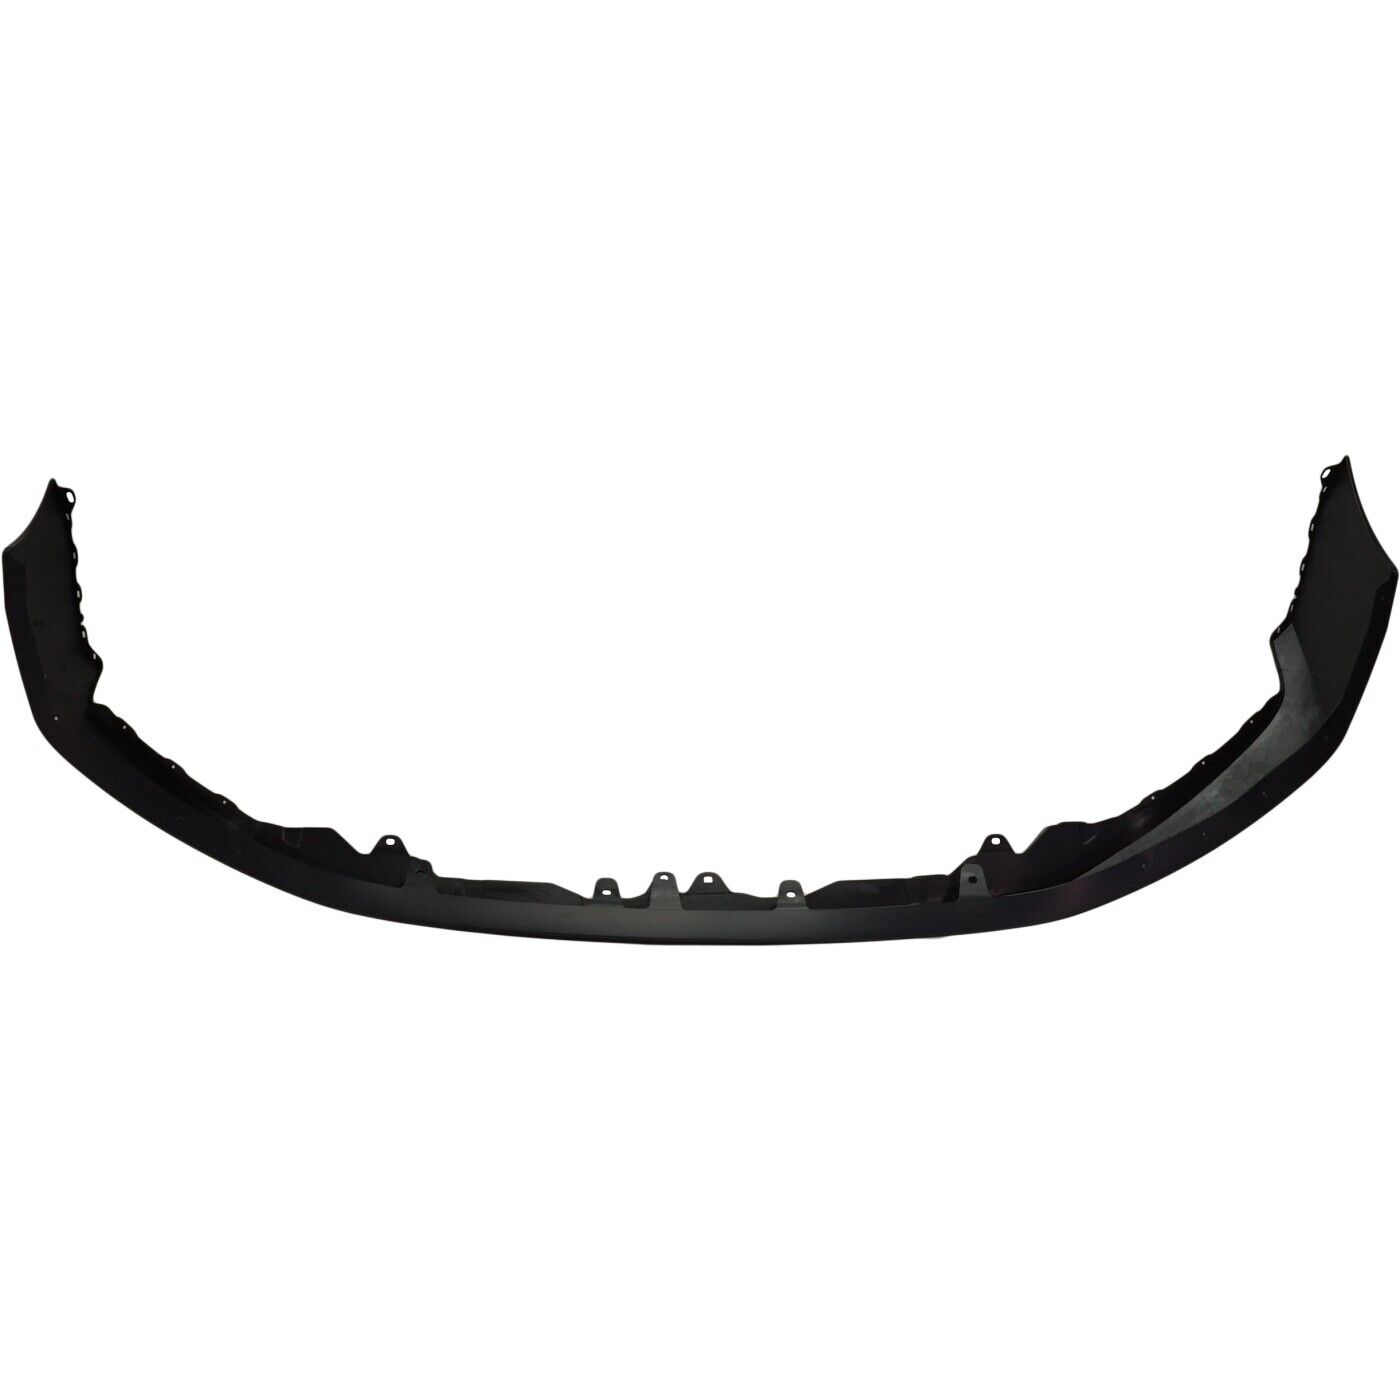 2017-2019 NISSAN TITAN; Front Bumper Cover upper; Painted to Match